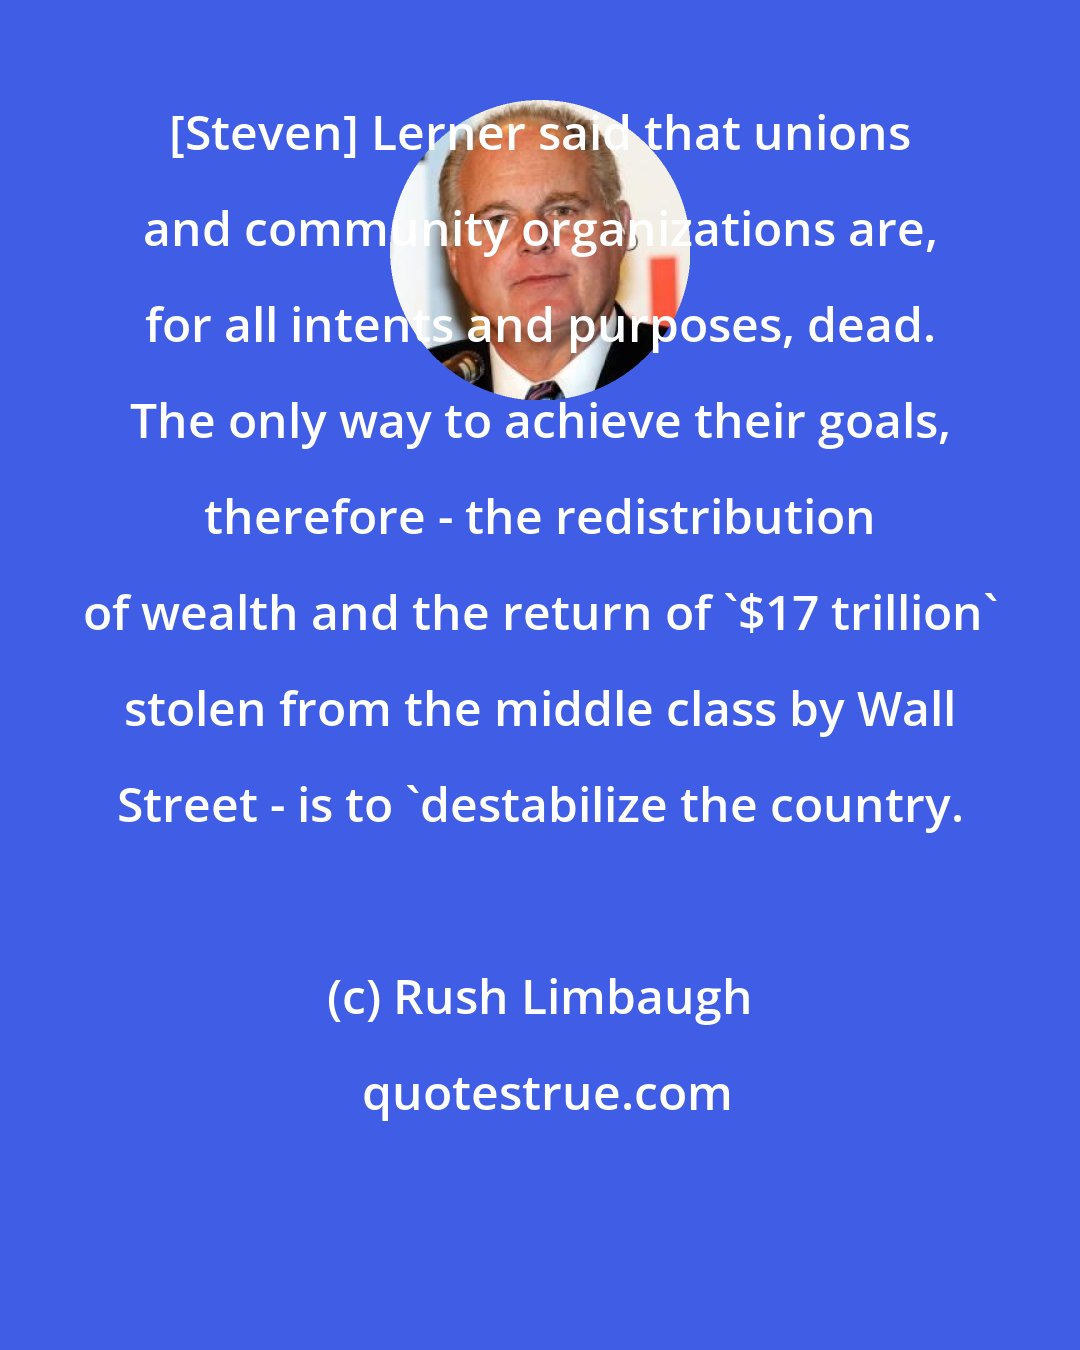 Rush Limbaugh: [Steven] Lerner said that unions and community organizations are, for all intents and purposes, dead. The only way to achieve their goals, therefore - the redistribution of wealth and the return of '$17 trillion' stolen from the middle class by Wall Street - is to 'destabilize the country.